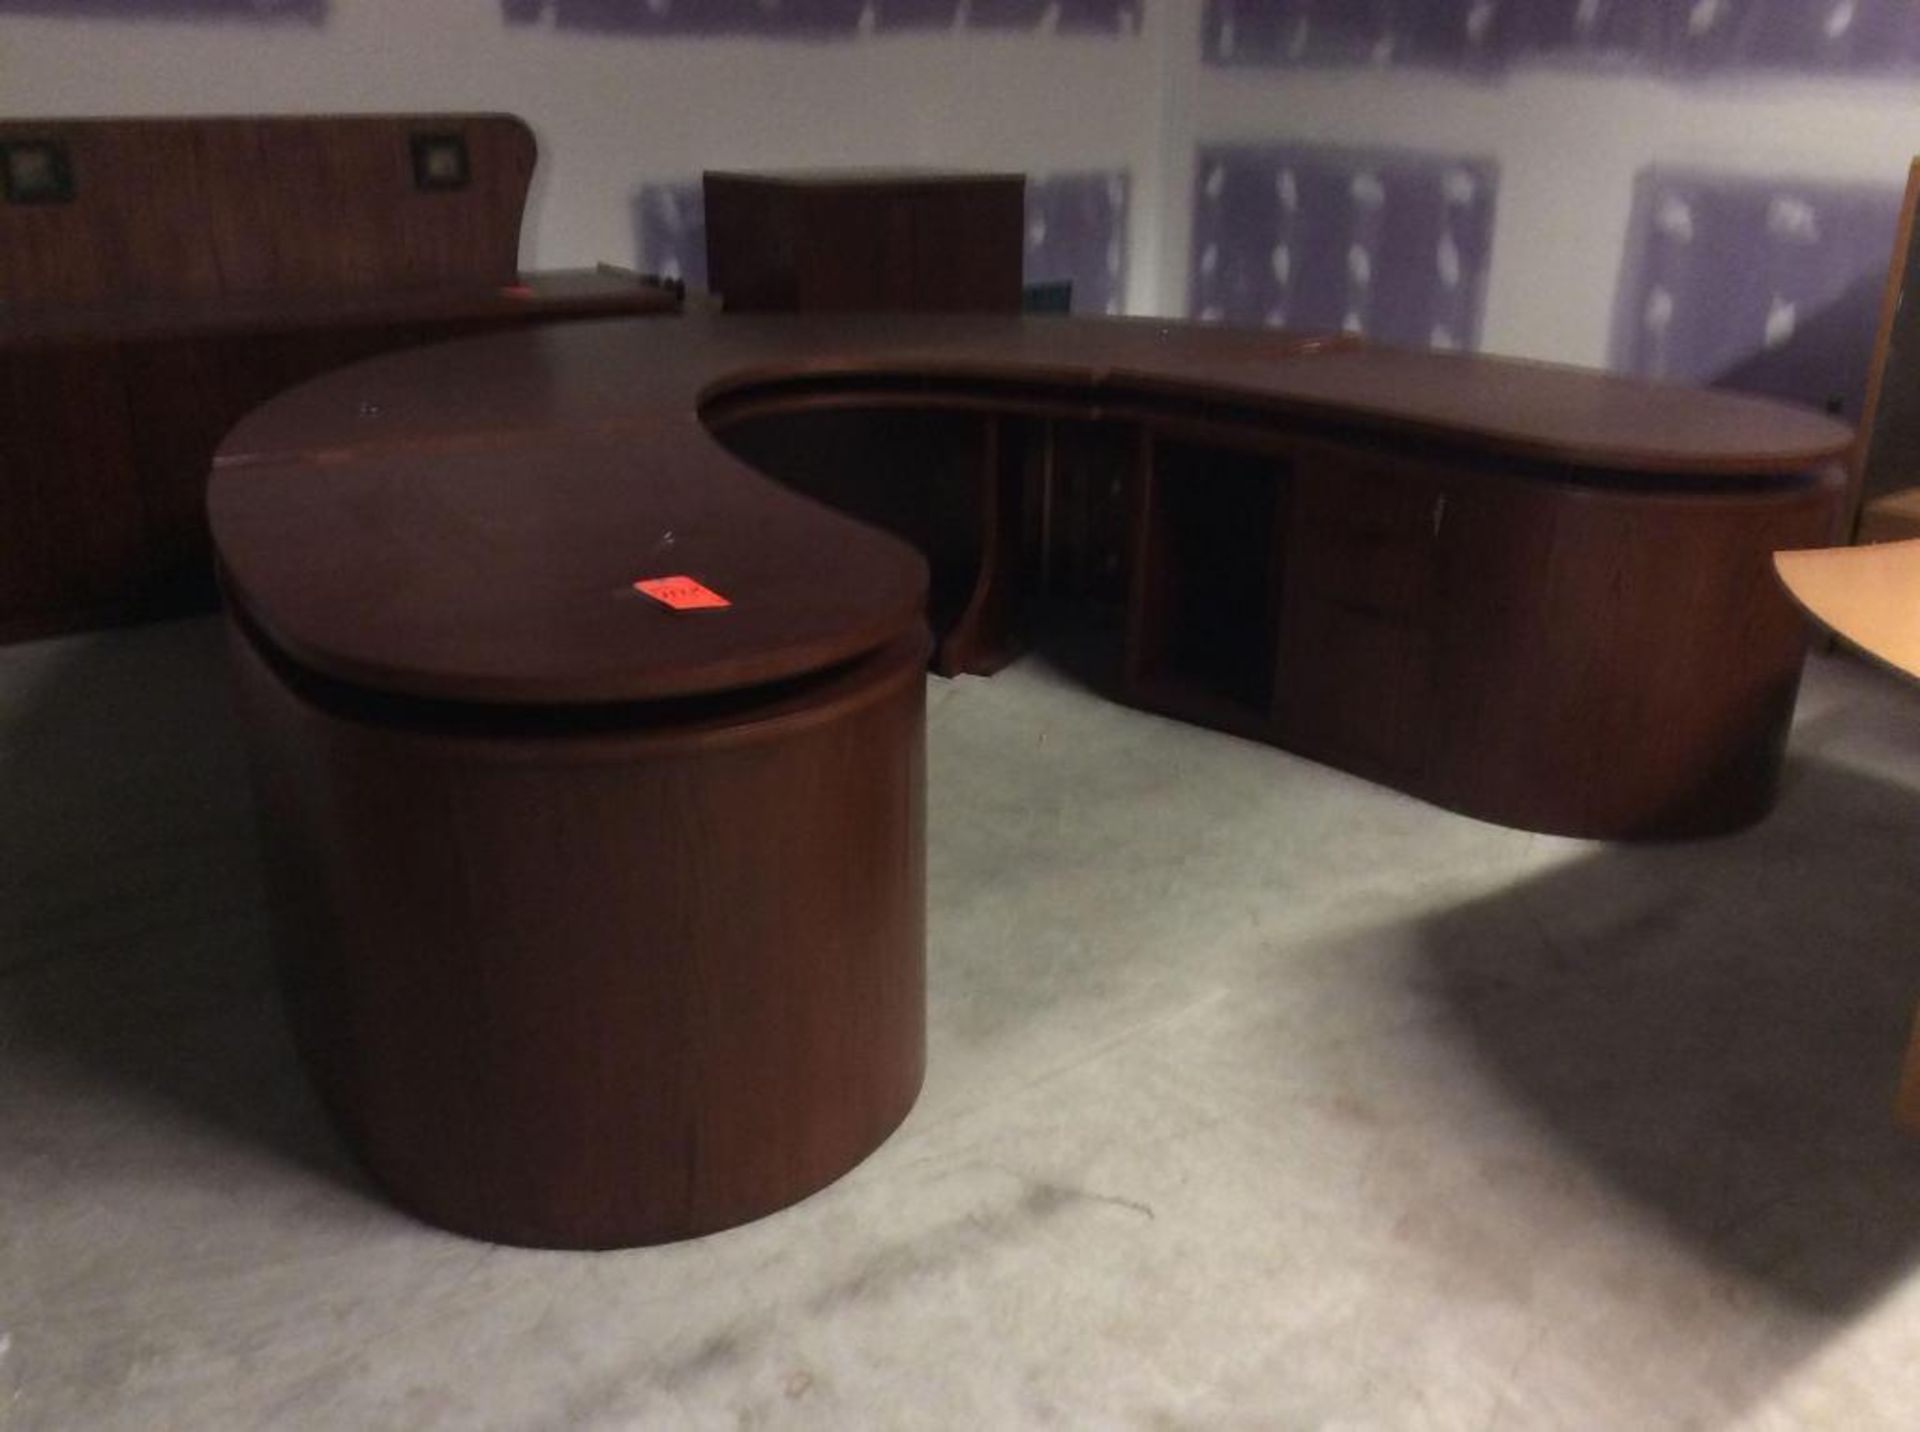 Lot of cherry finish executive office furniture - includes U-shaped 3-piece desk, credenza and cabin